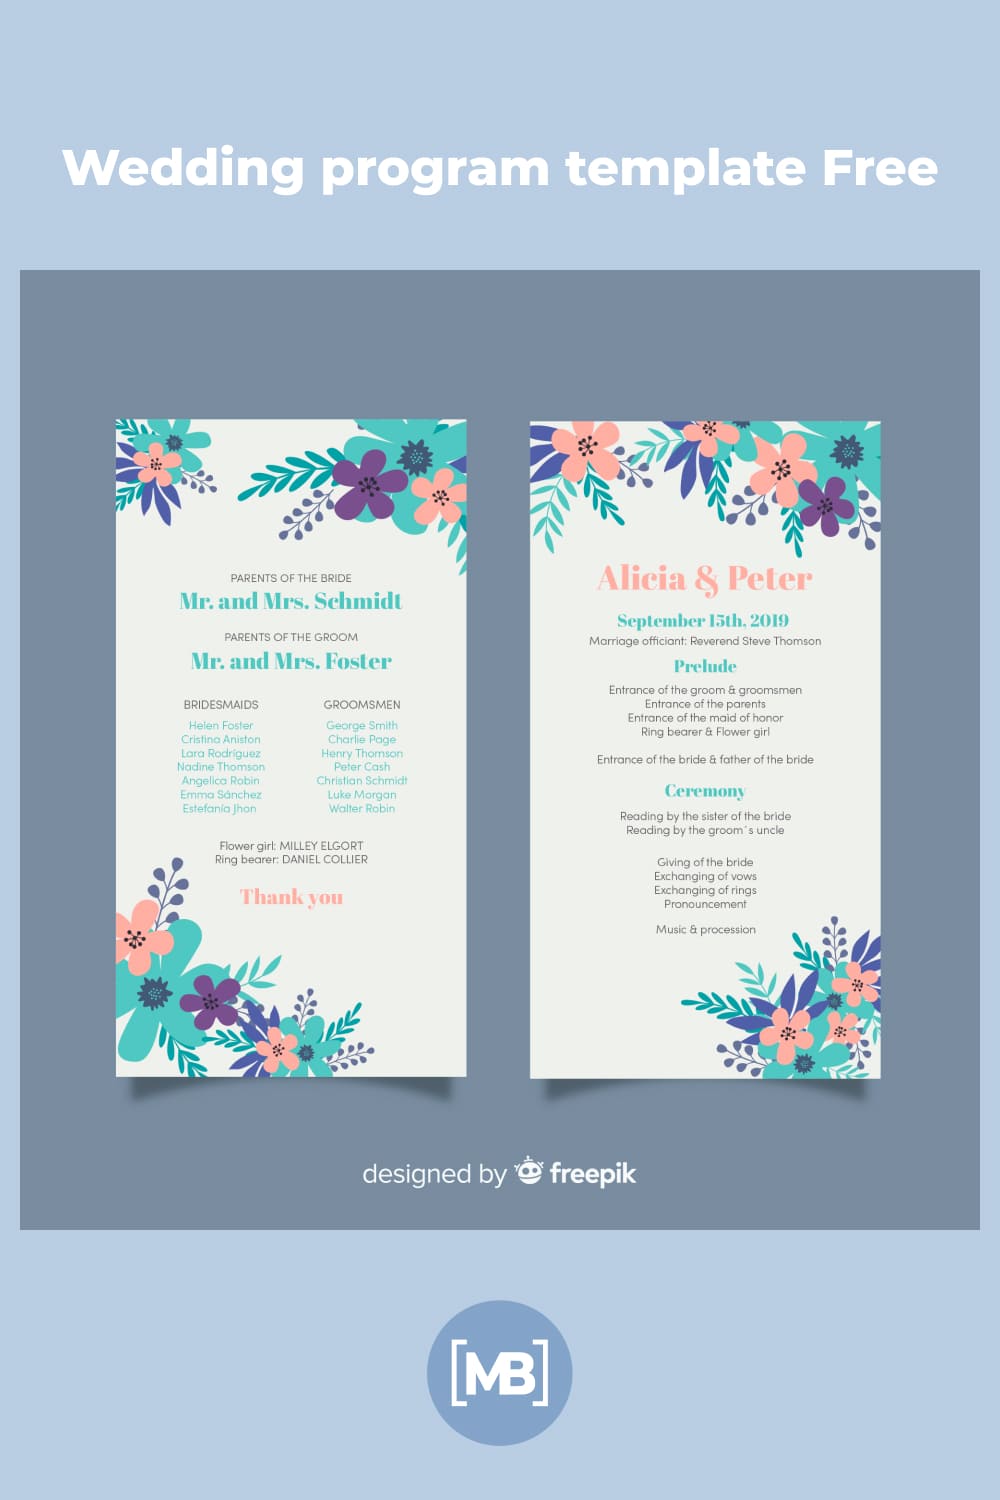 Young and lively templates for a simple and fun wedding.